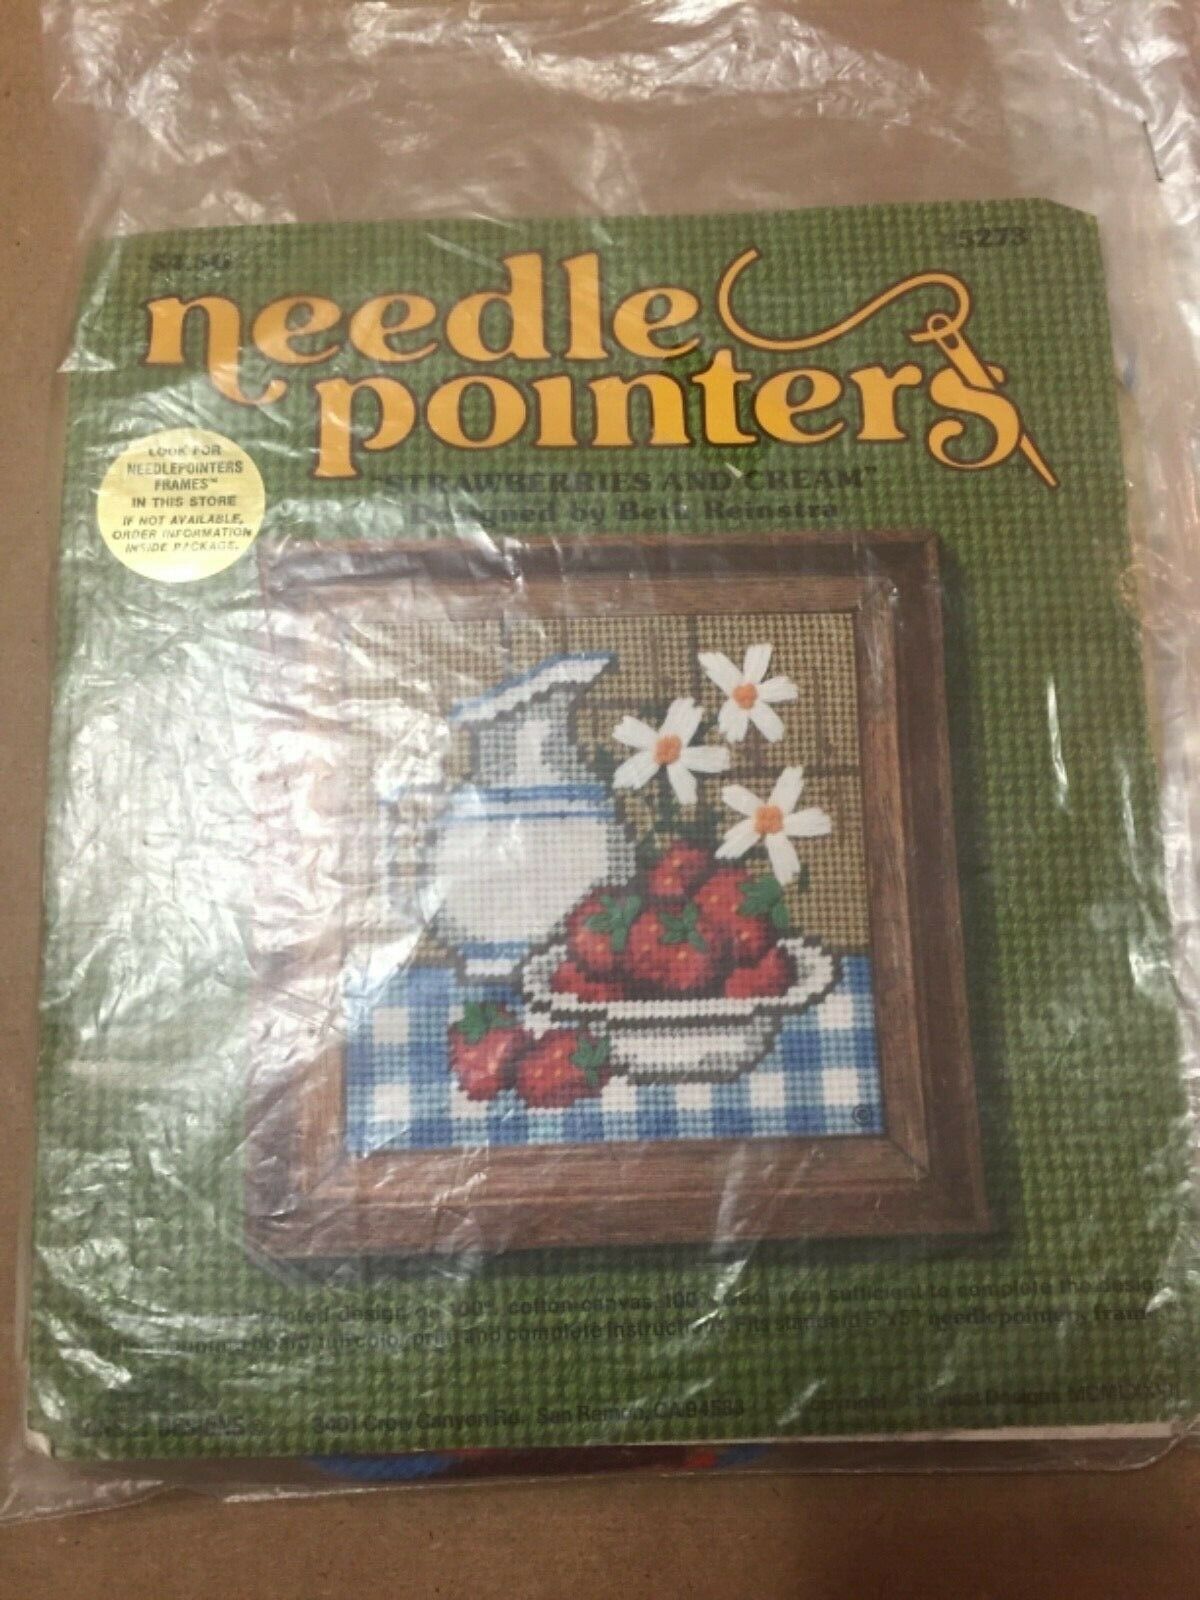 Vintage Needle Pointers Strawberries And Cream, Designed By Beth Reinstra